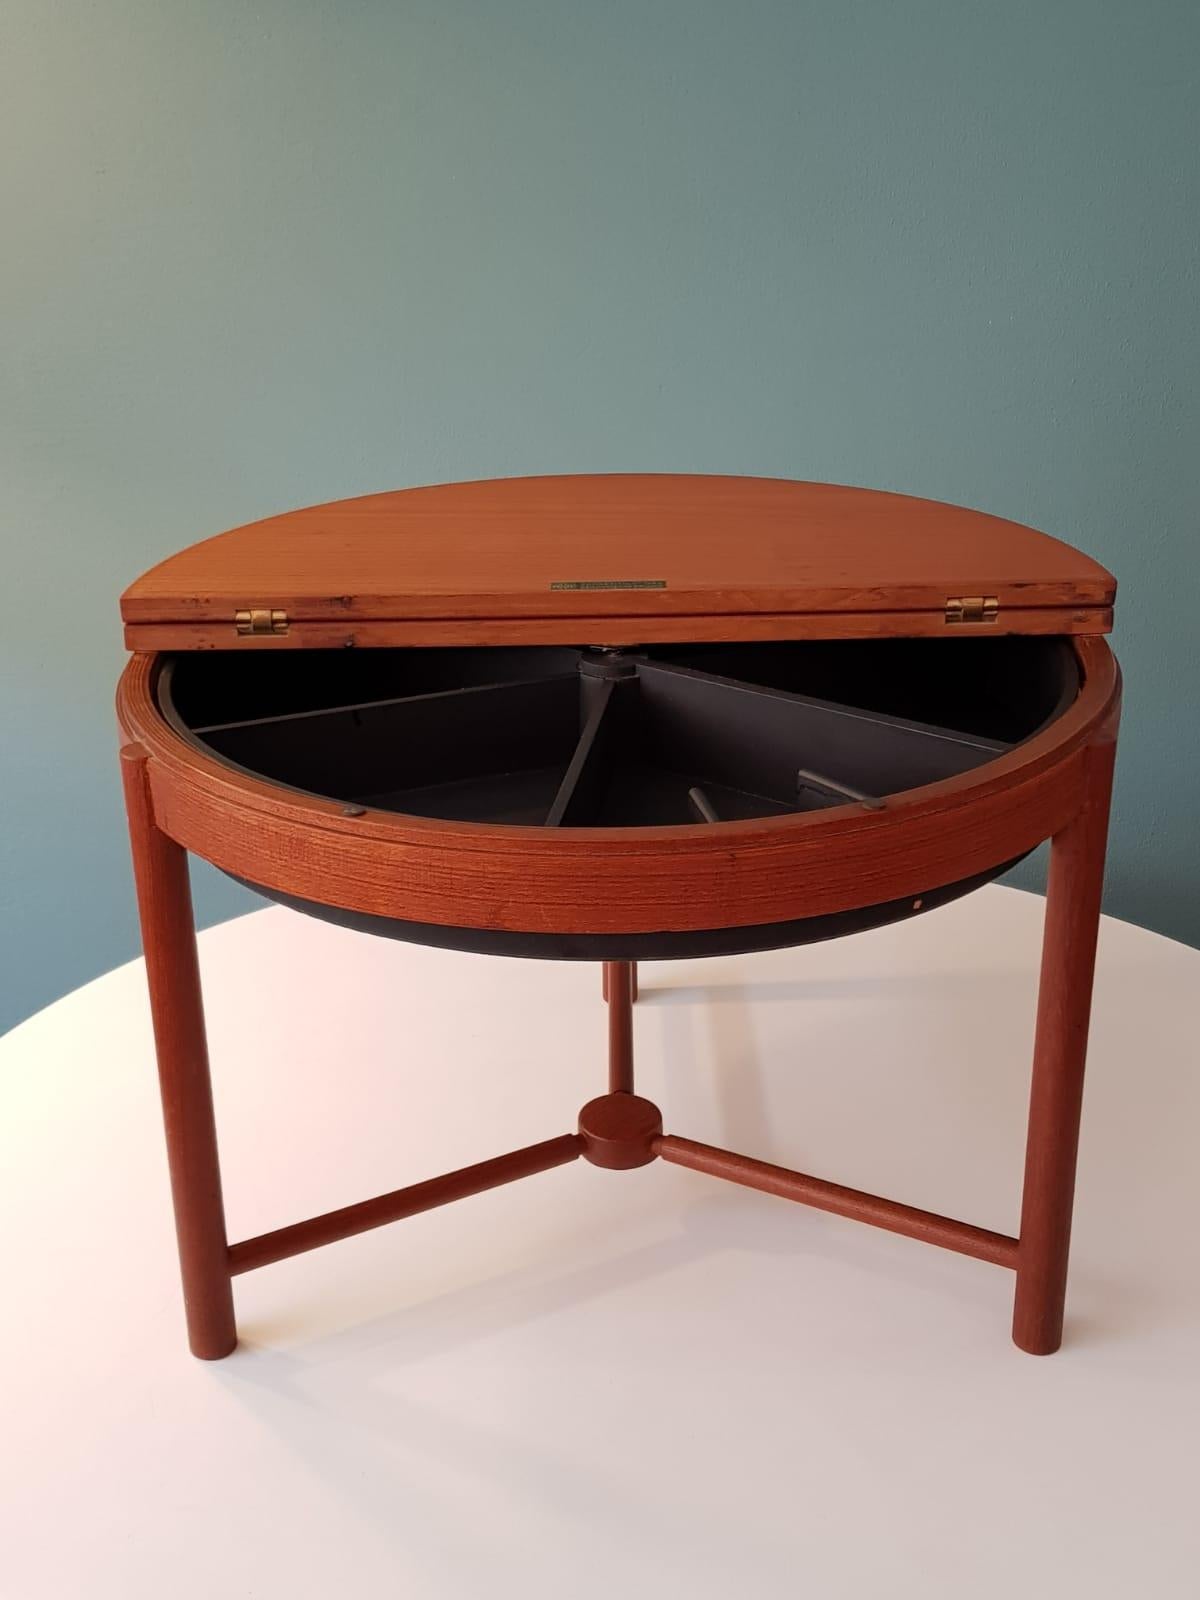 A beautiful object is this practical small side table Syklus bar table. You can stow all kinds of things under the hinged lid. This teak bar table also won 1st prize in 1962 in a Norwegian design contest.